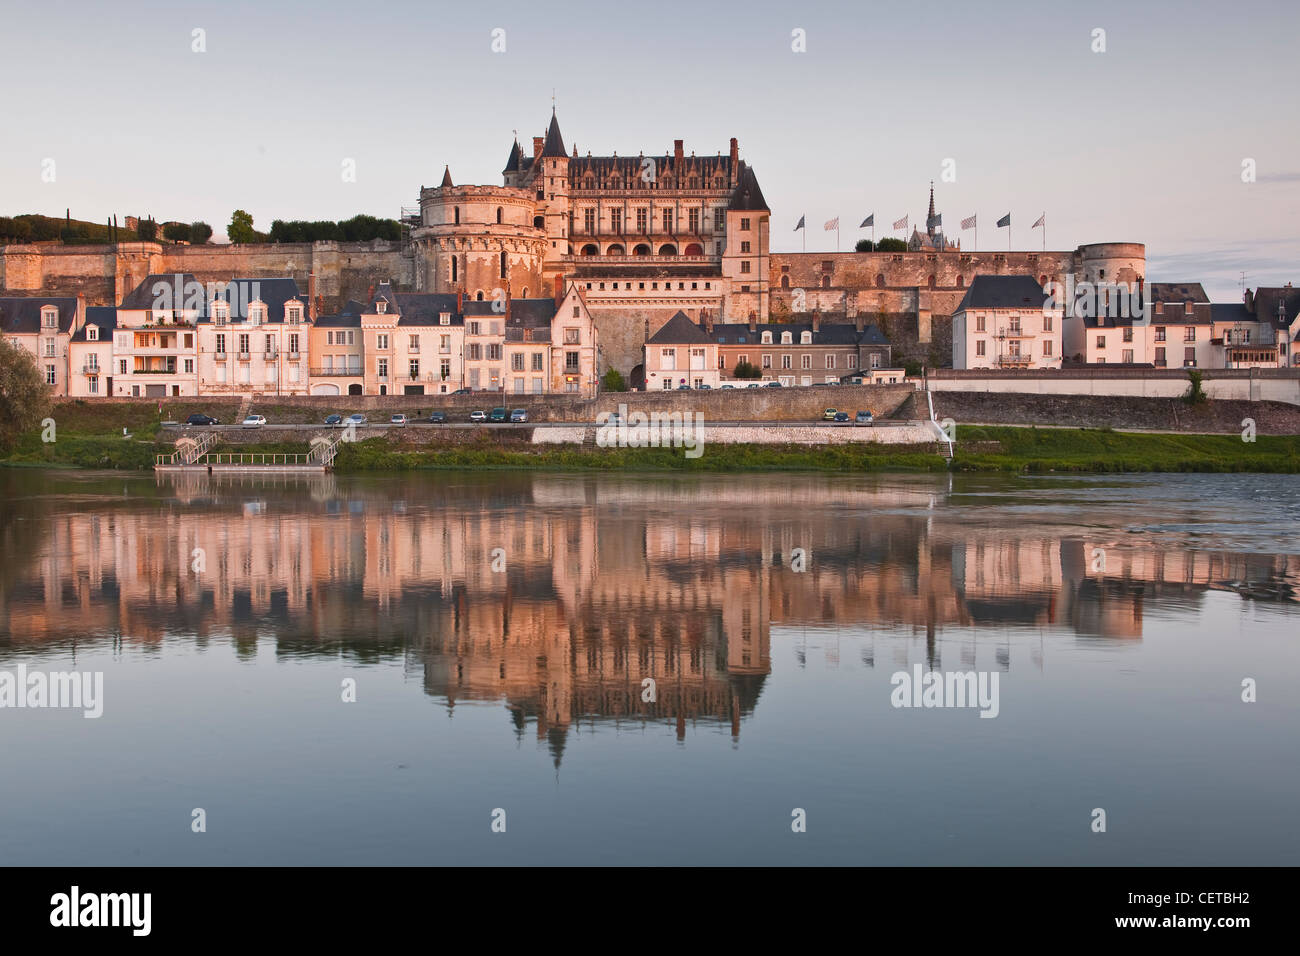 Looking across the river Loire to the chateau of Amboise in France. Stock Photo